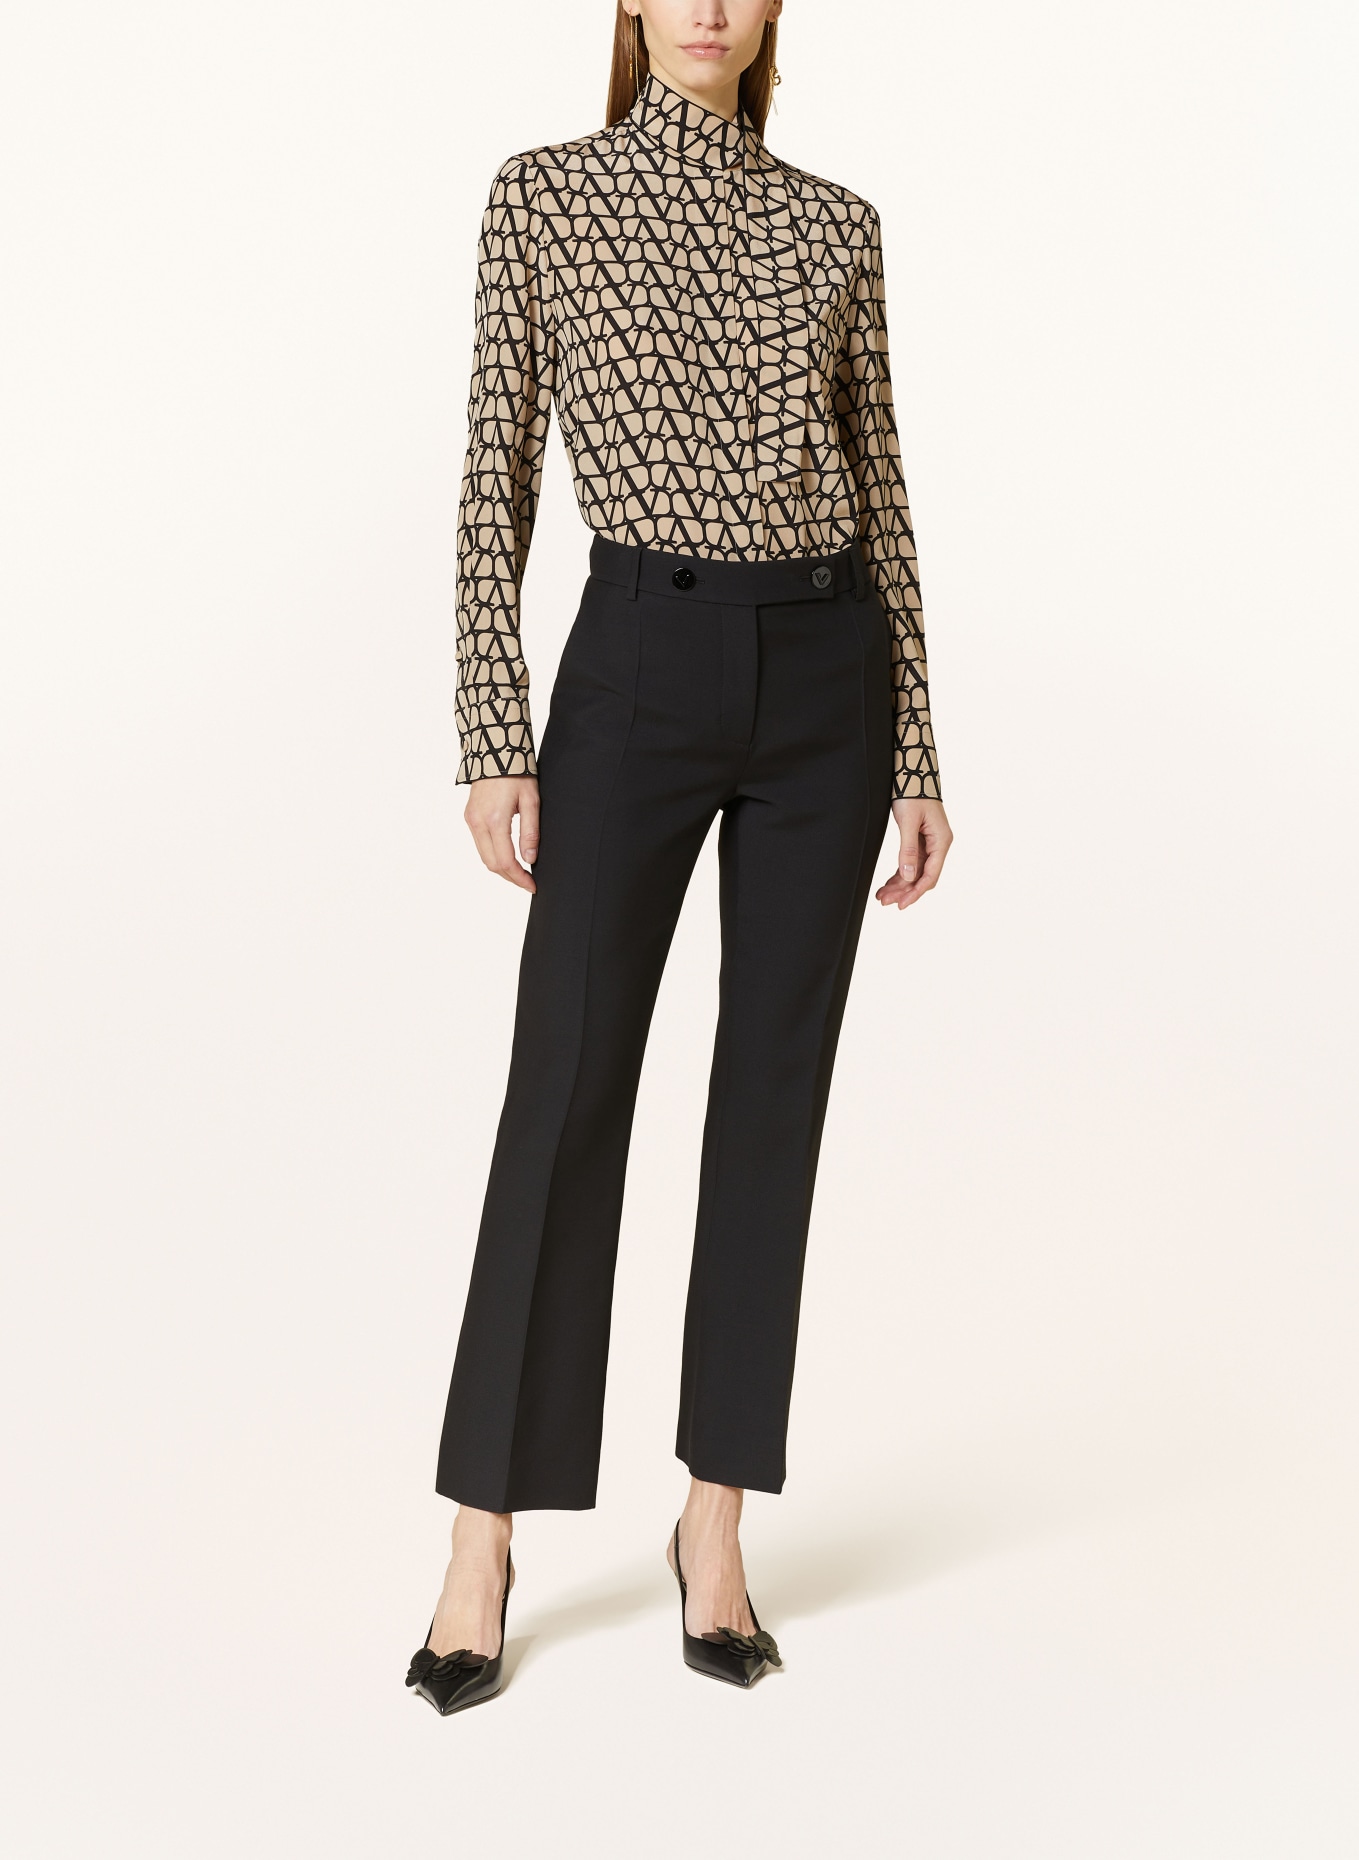 VALENTINO Bow-tie blouse VLOGO made of silk, Color: BEIGE/ BLACK (Image 2)